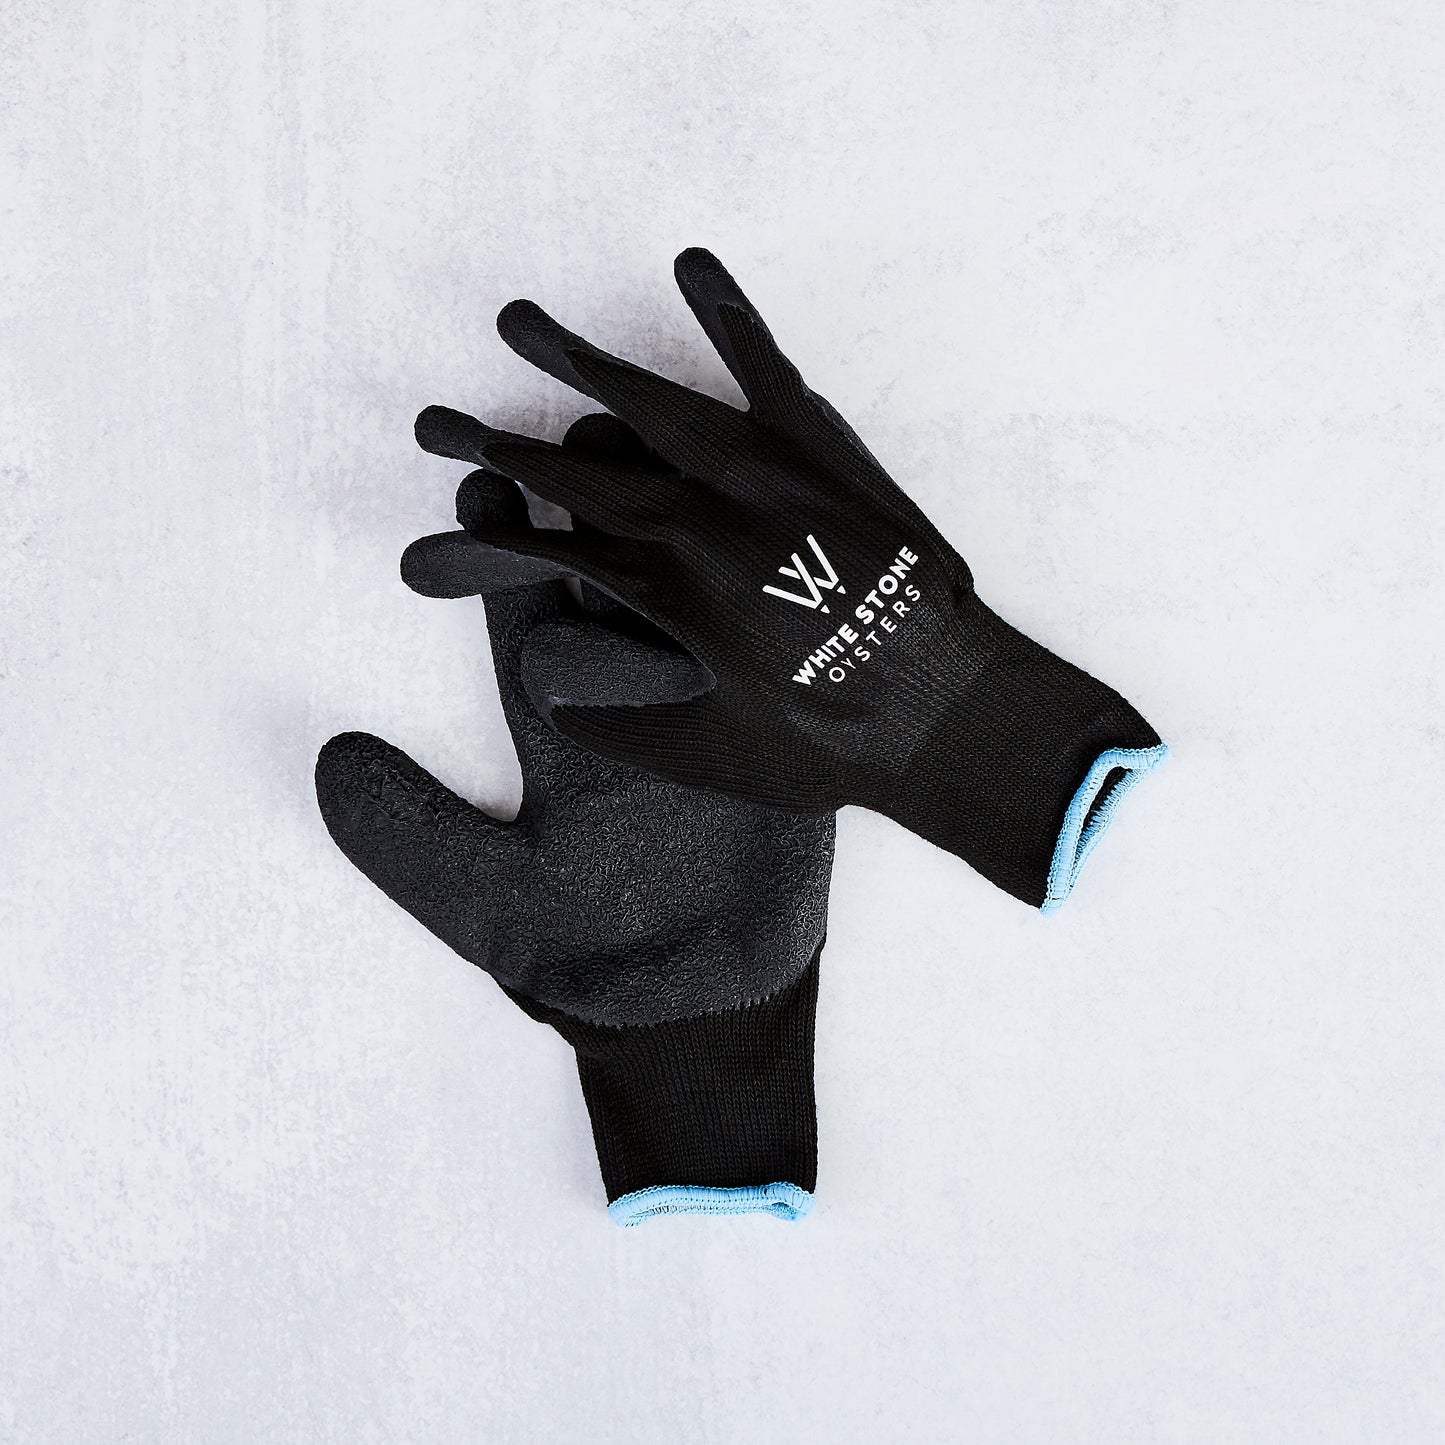 ROC Gloves + Knife – Real Oyster Cult